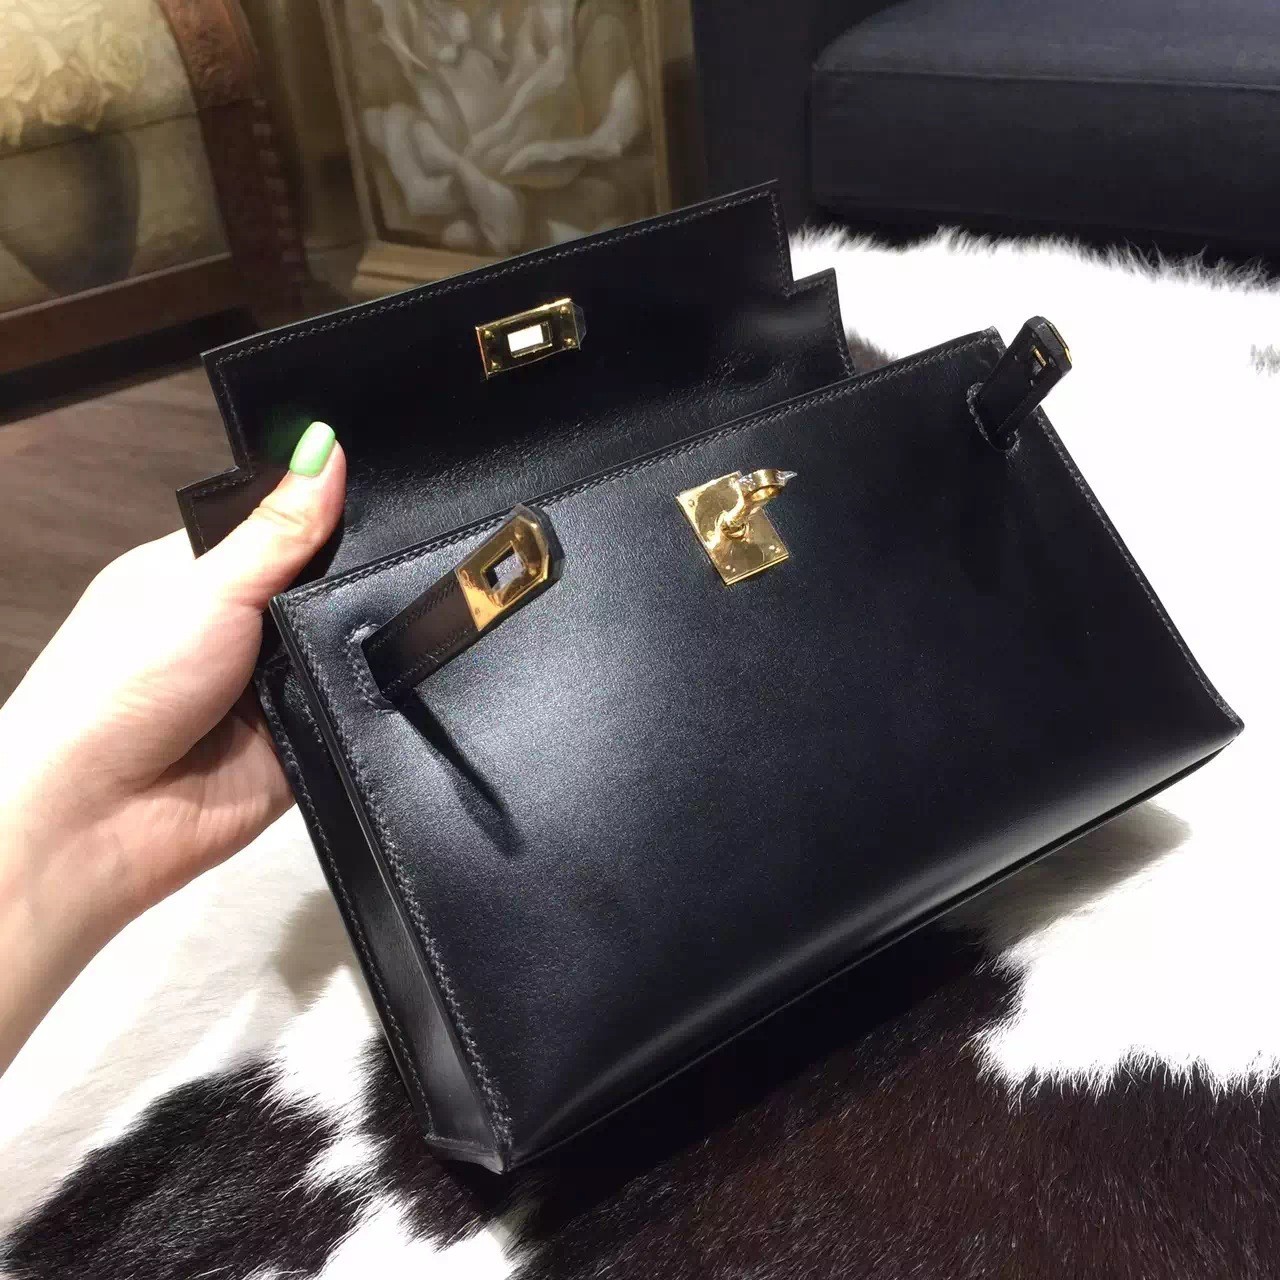 Missfazura carried H kelly pochette black swift leather with gold